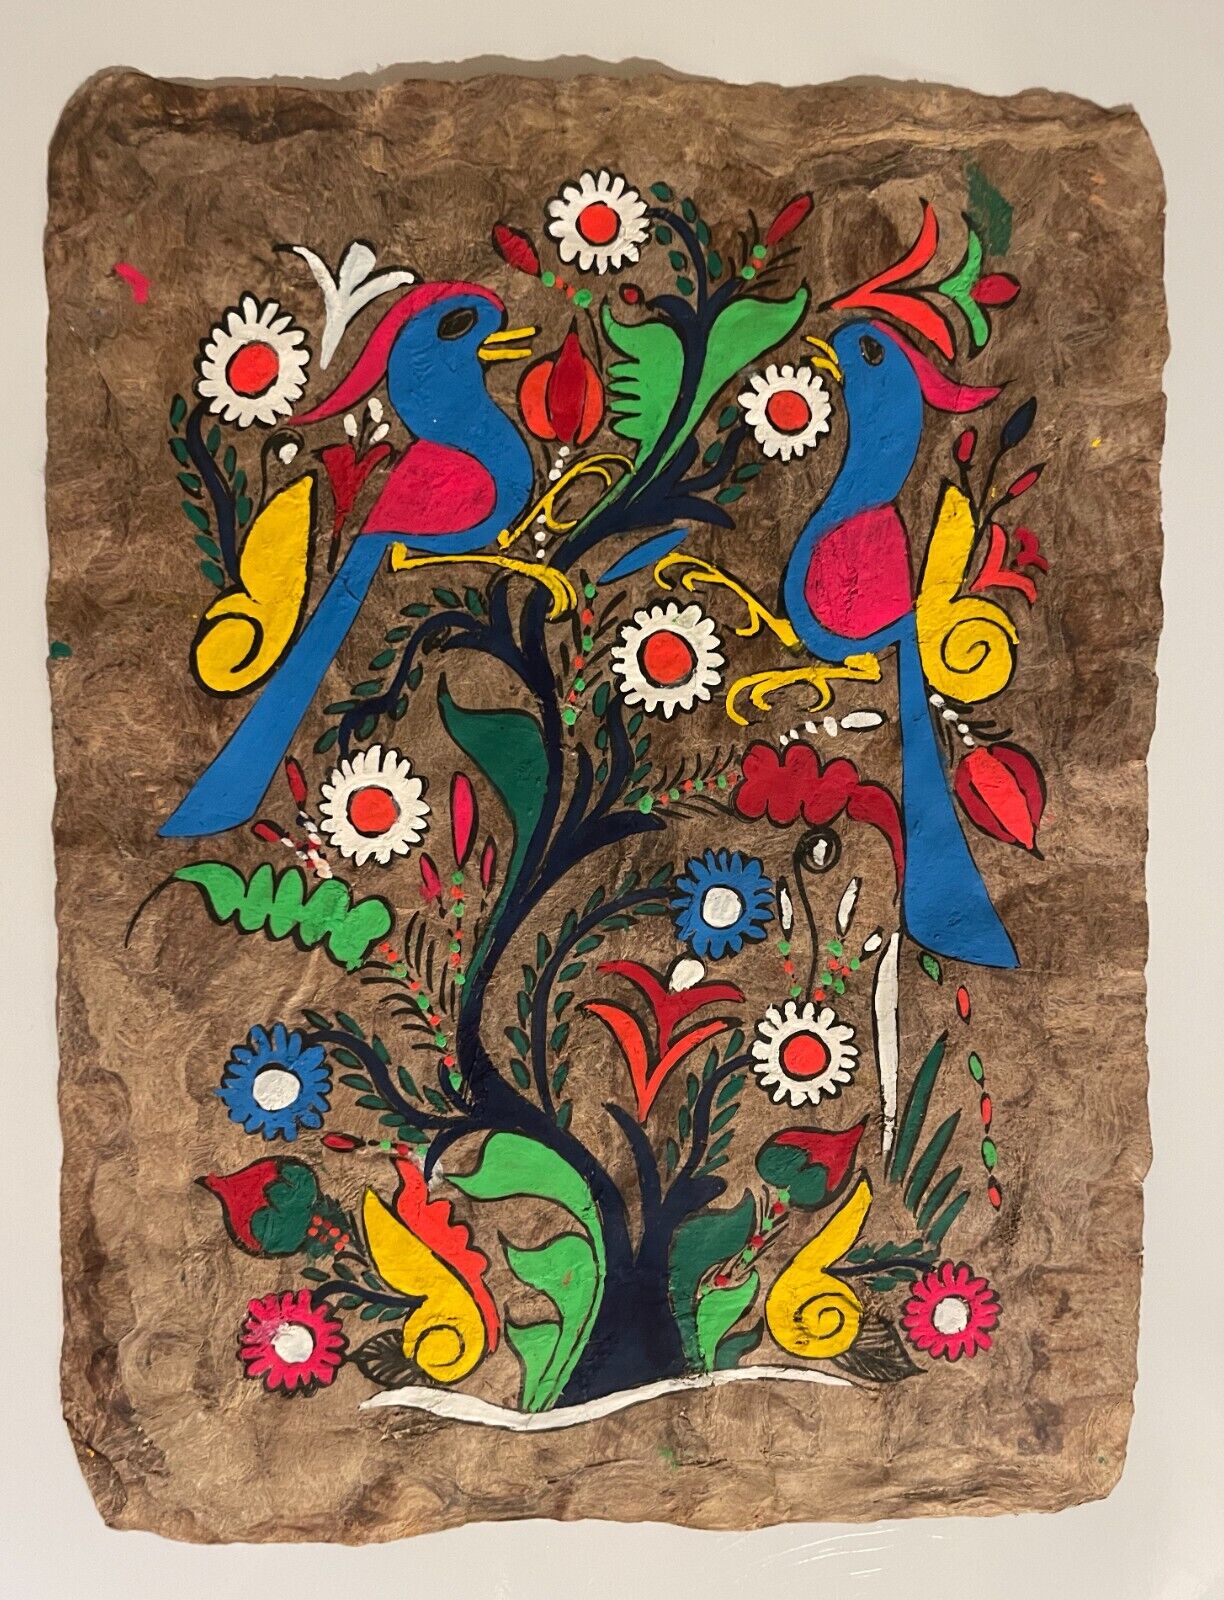 Vintage Mid-60’s Colorful Mexican Folk Art Painting on Amate Tree Bark Parchment